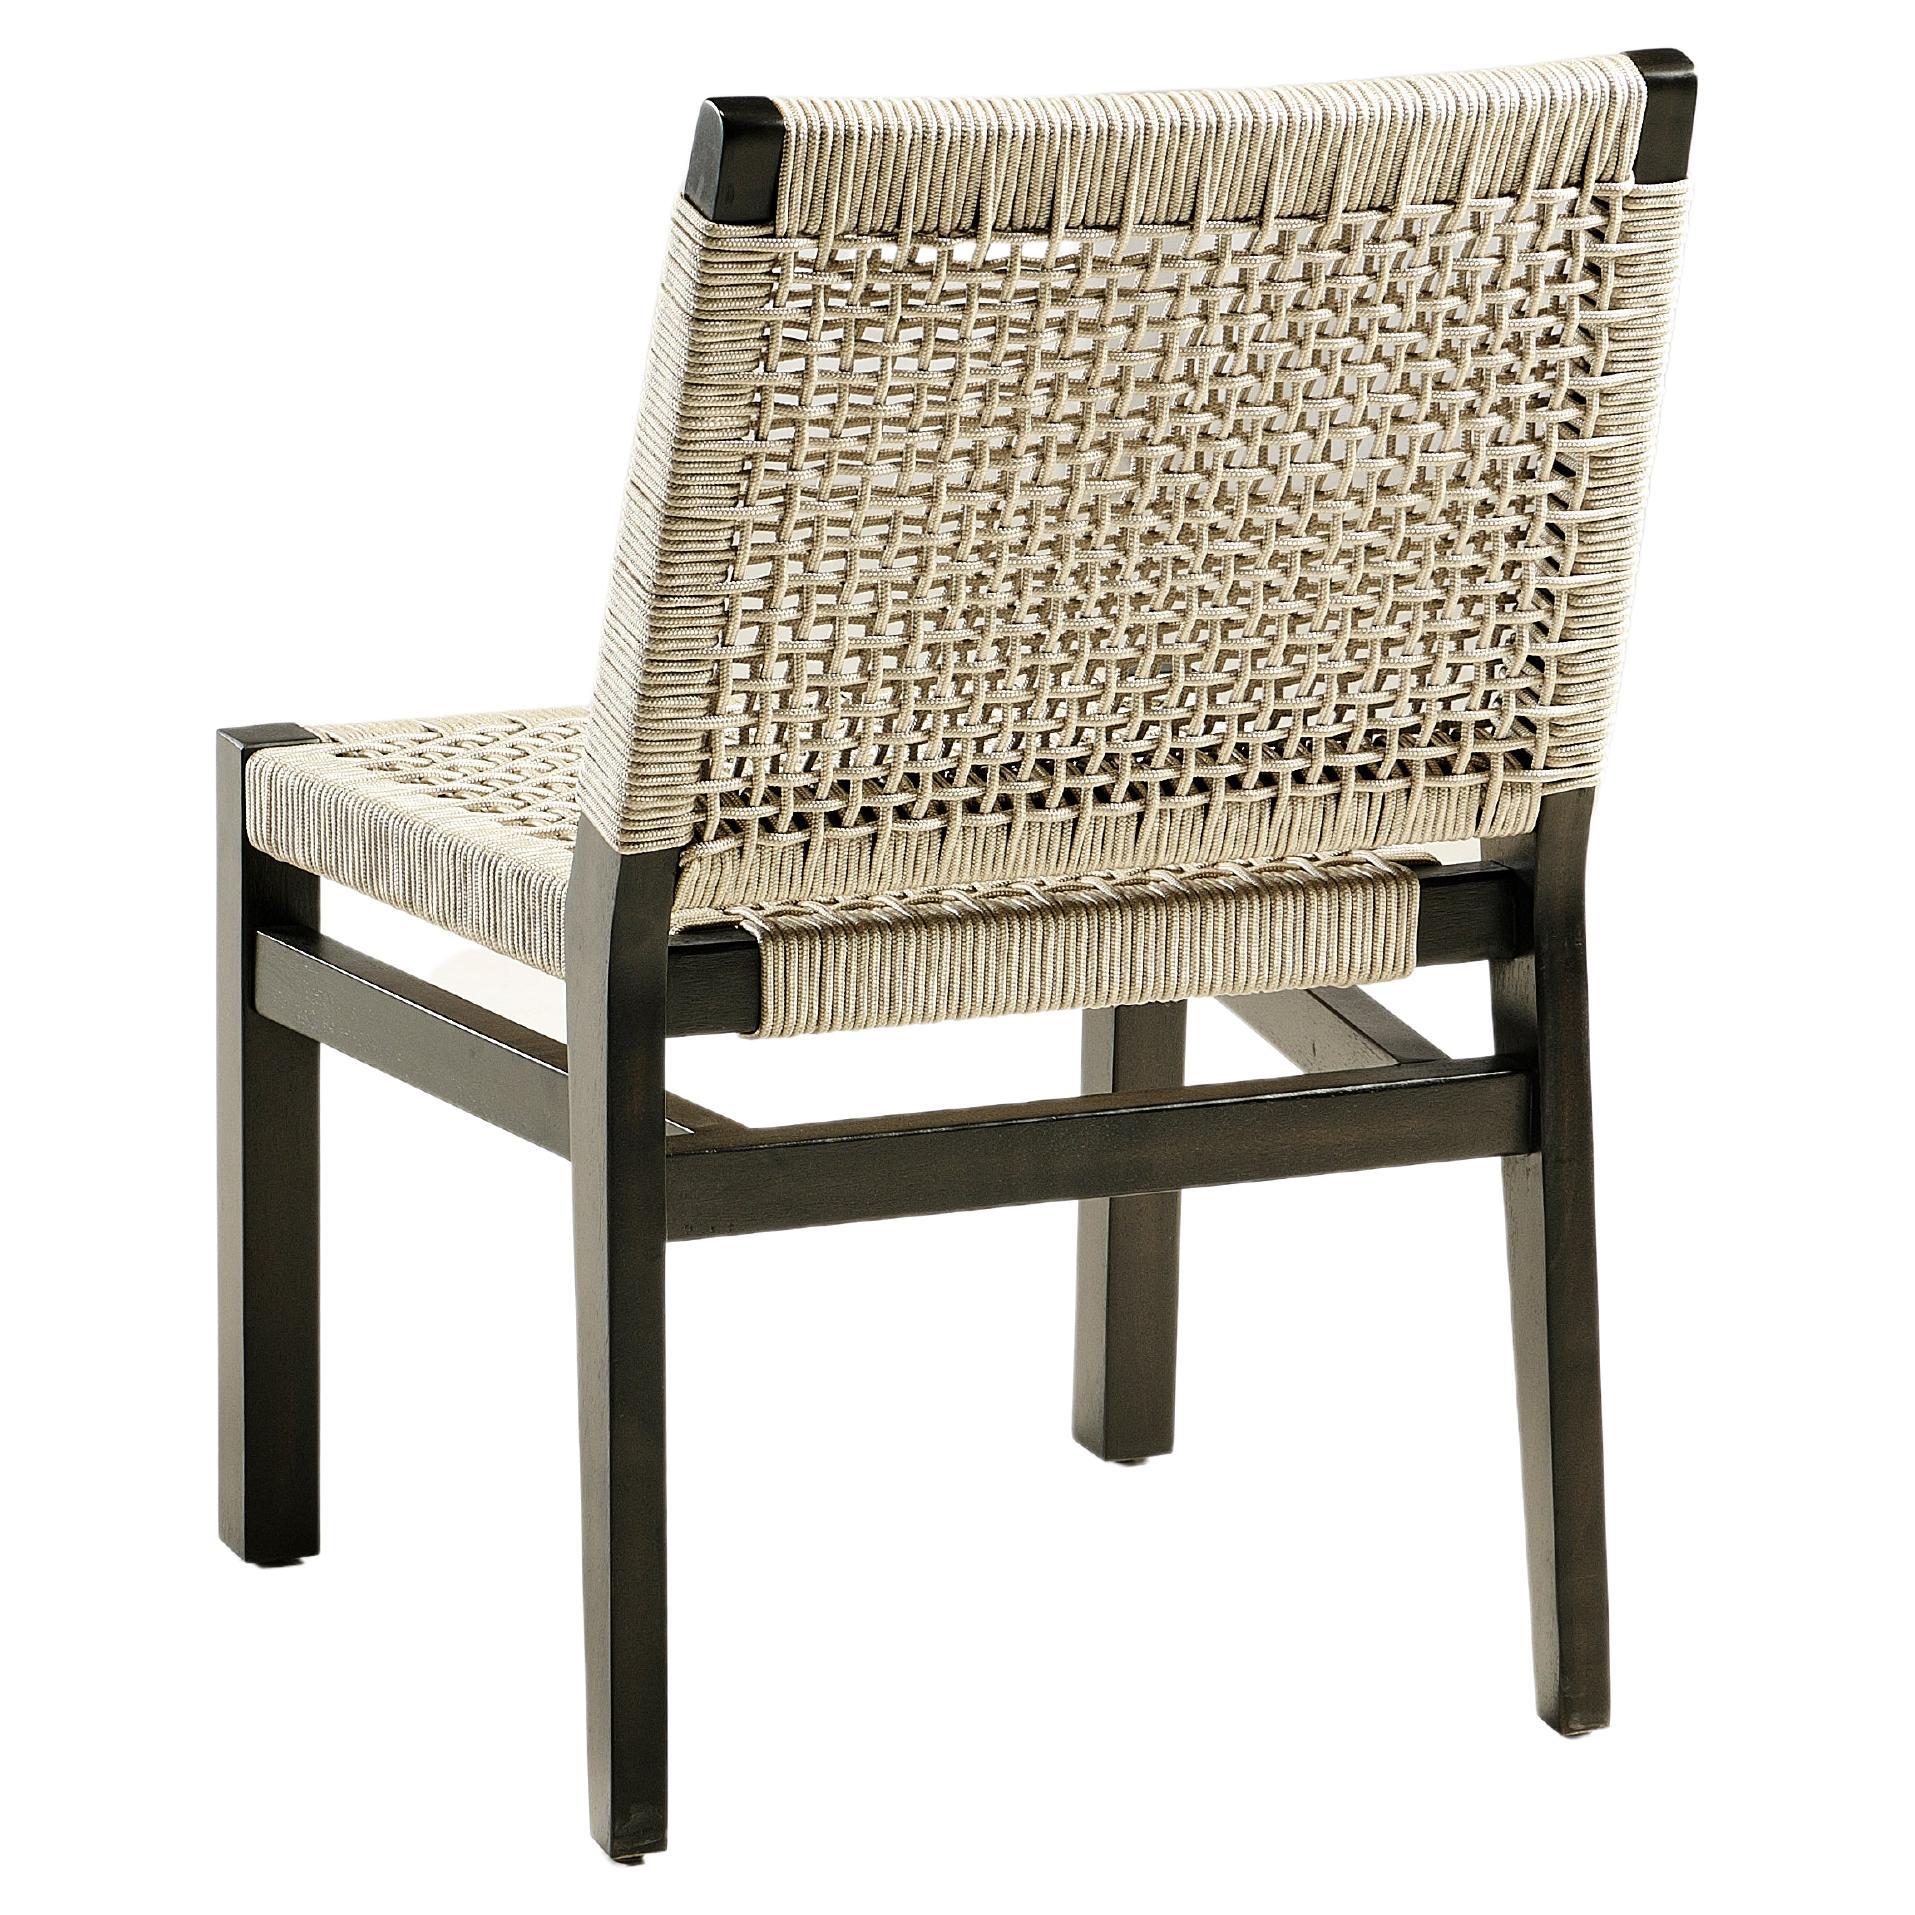 10 Stackable Outdoor Dining Chairs, Wood / Rope For Sale